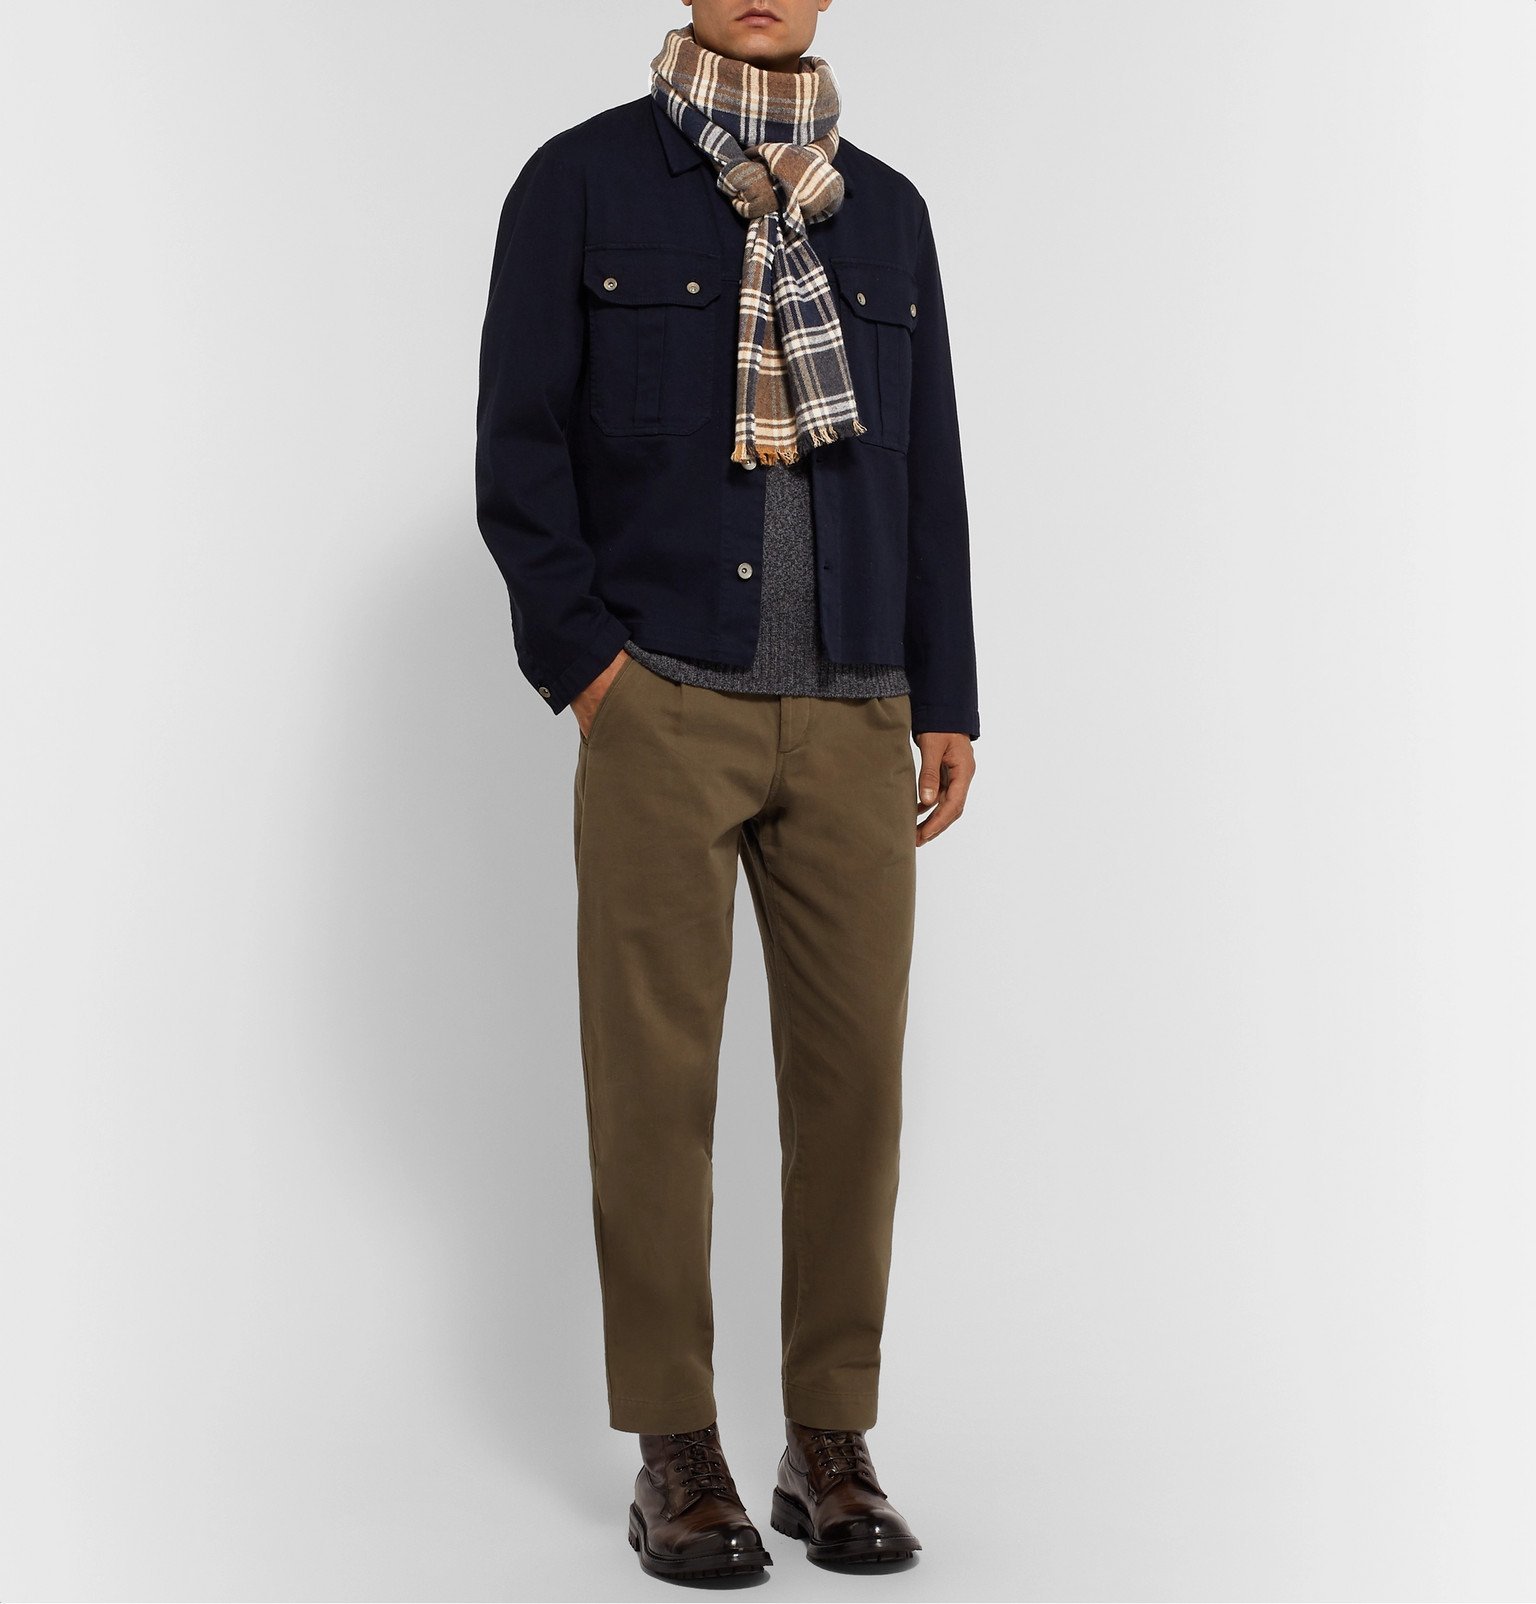 Oliver Spencer - Checked Organic Cotton Scarf - Neutrals